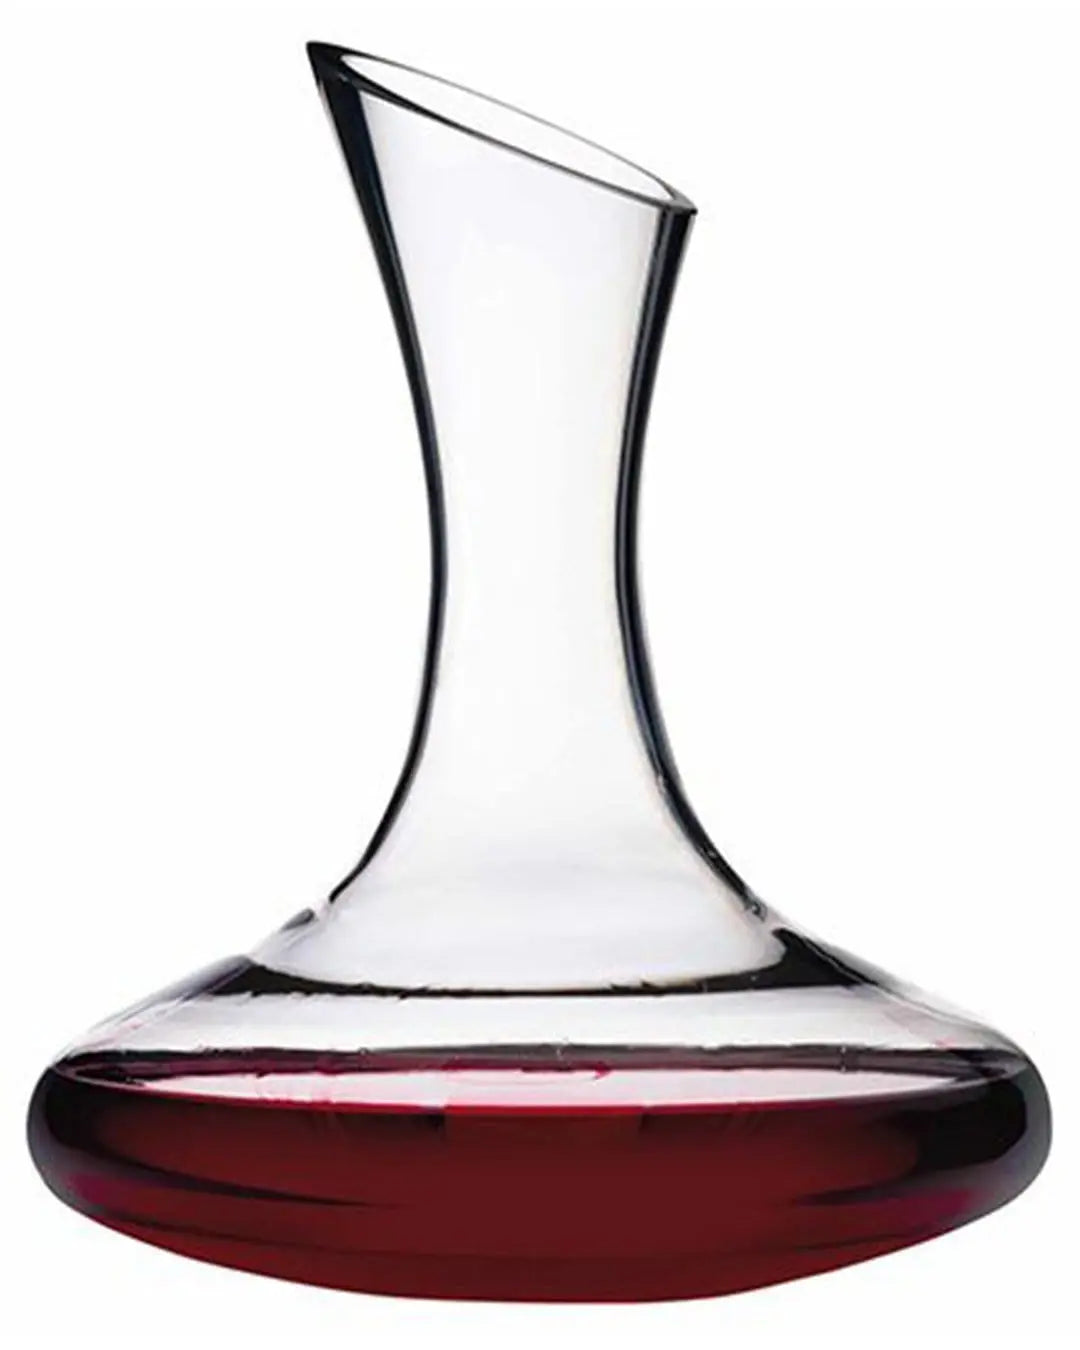 BarCraft Deluxe Wine Decanter 1.5 L Glass Tableware